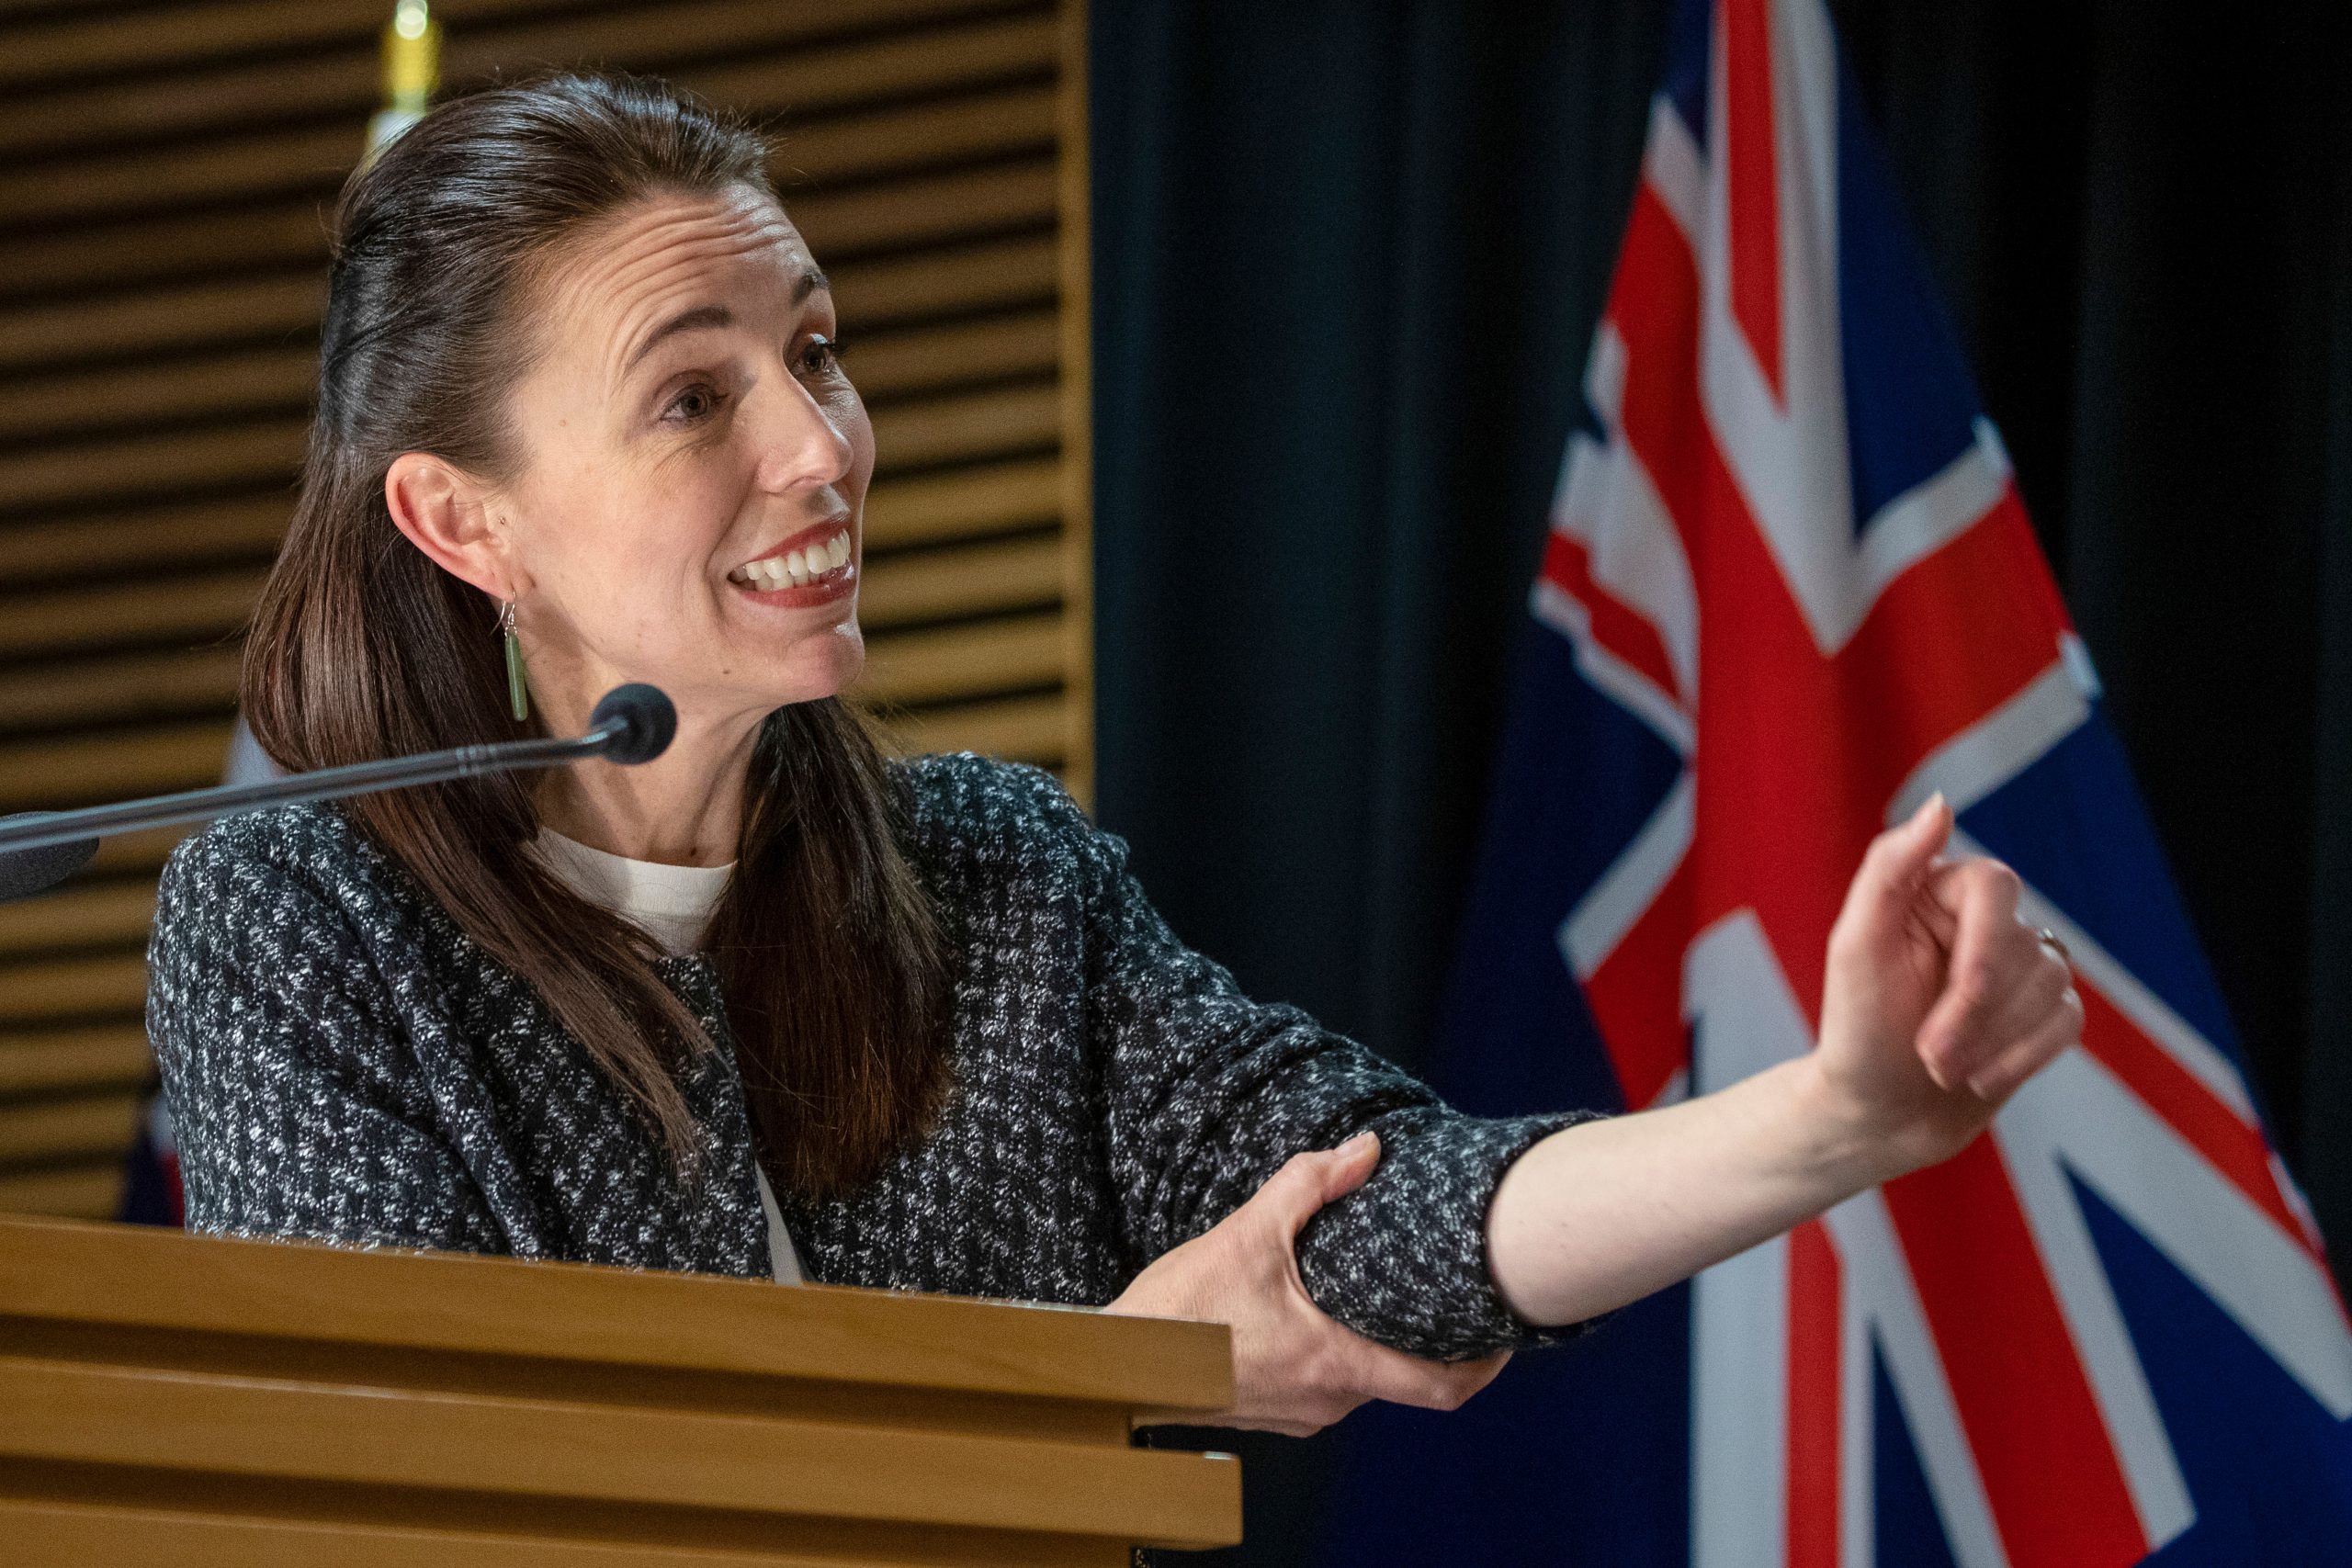 Sorry, a slight distraction: New Zealand PM reacts to 5.5 magnitude quake